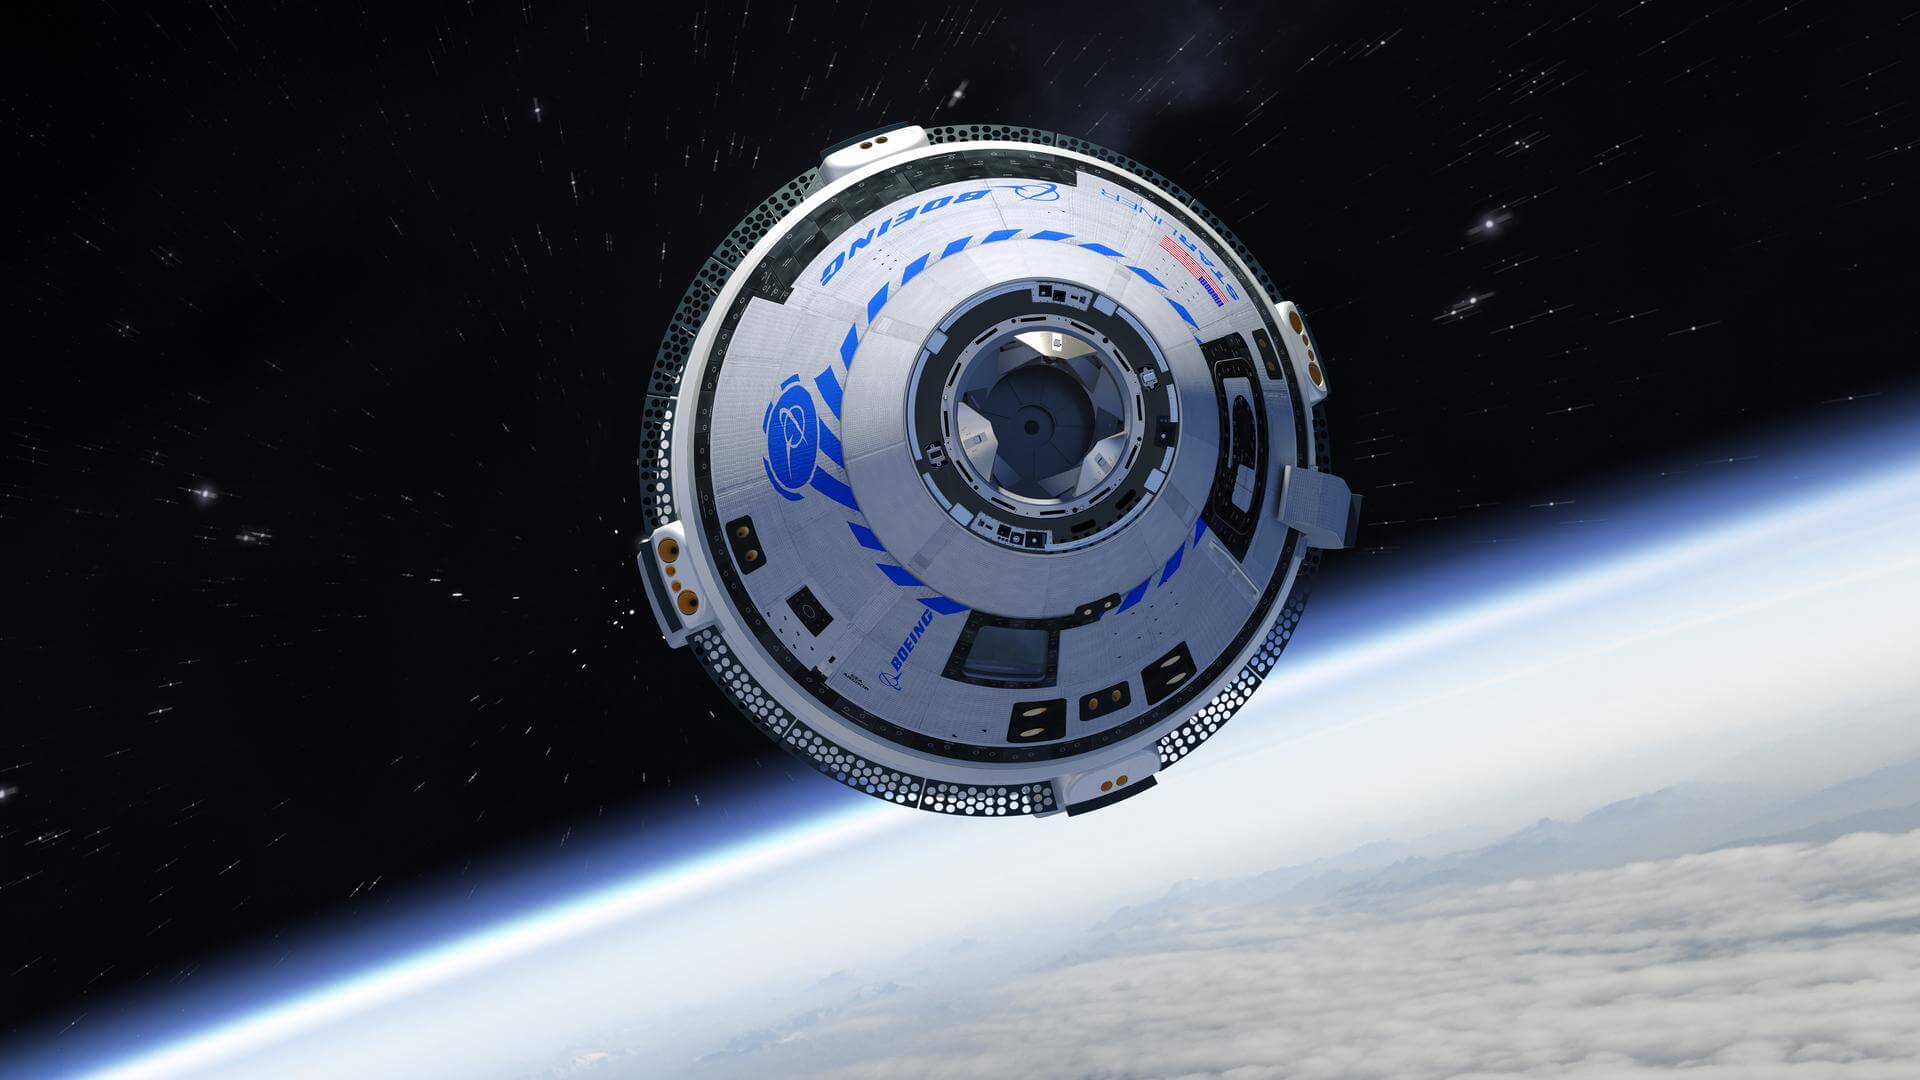 Boeing Starliner OFT-2 Pre-Launch News Conference #2 Event image